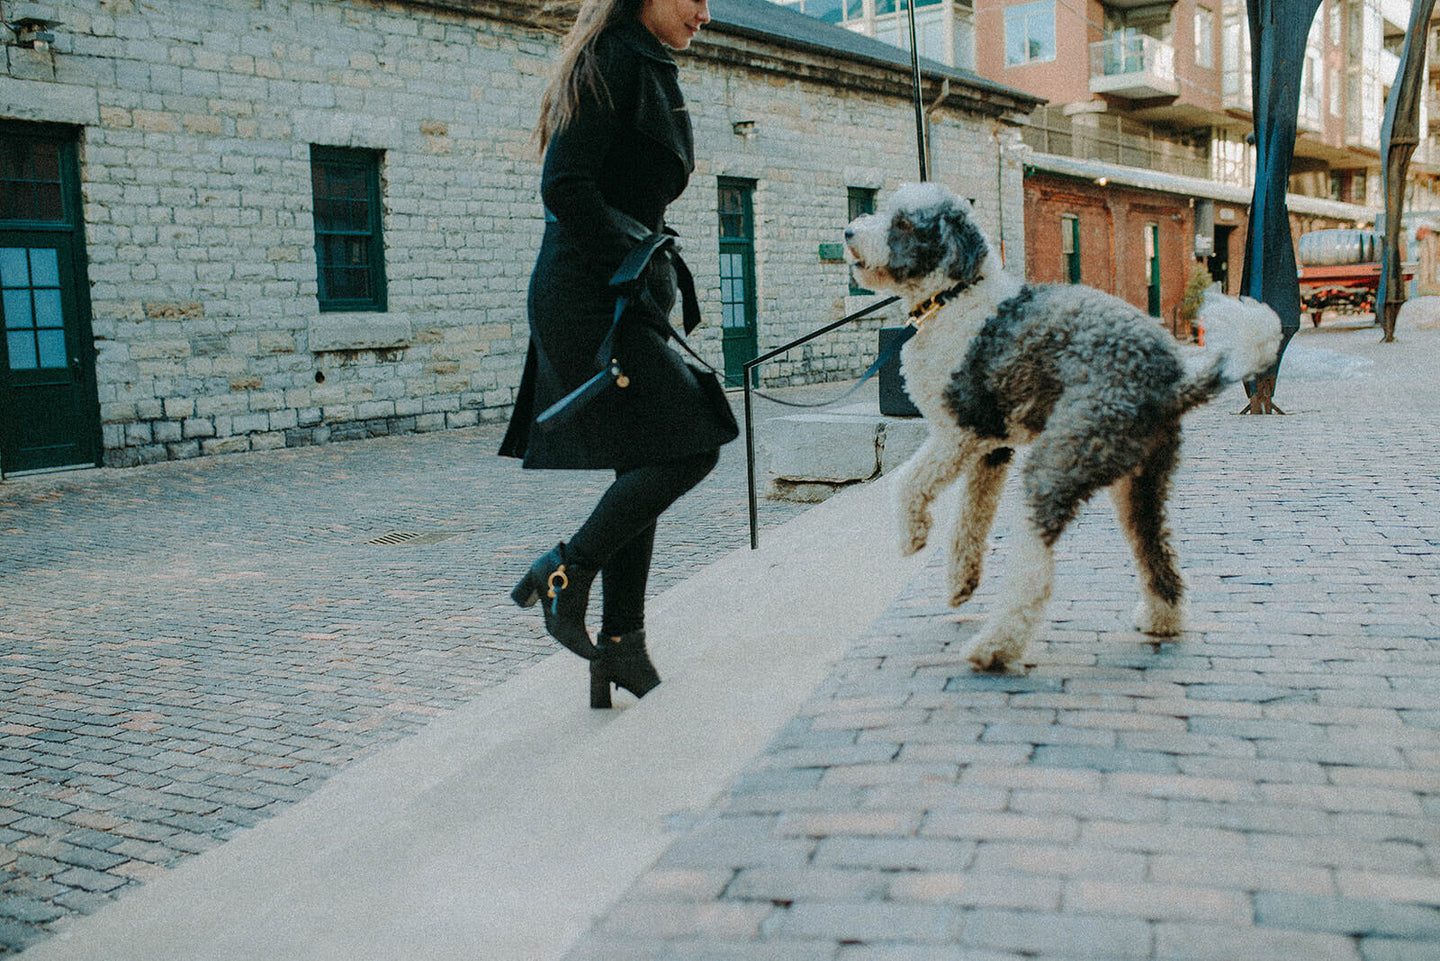 Sheepadoodle Dog is wearing a black collar and leash with gold while walking with woman wearing all black on cobblestone road